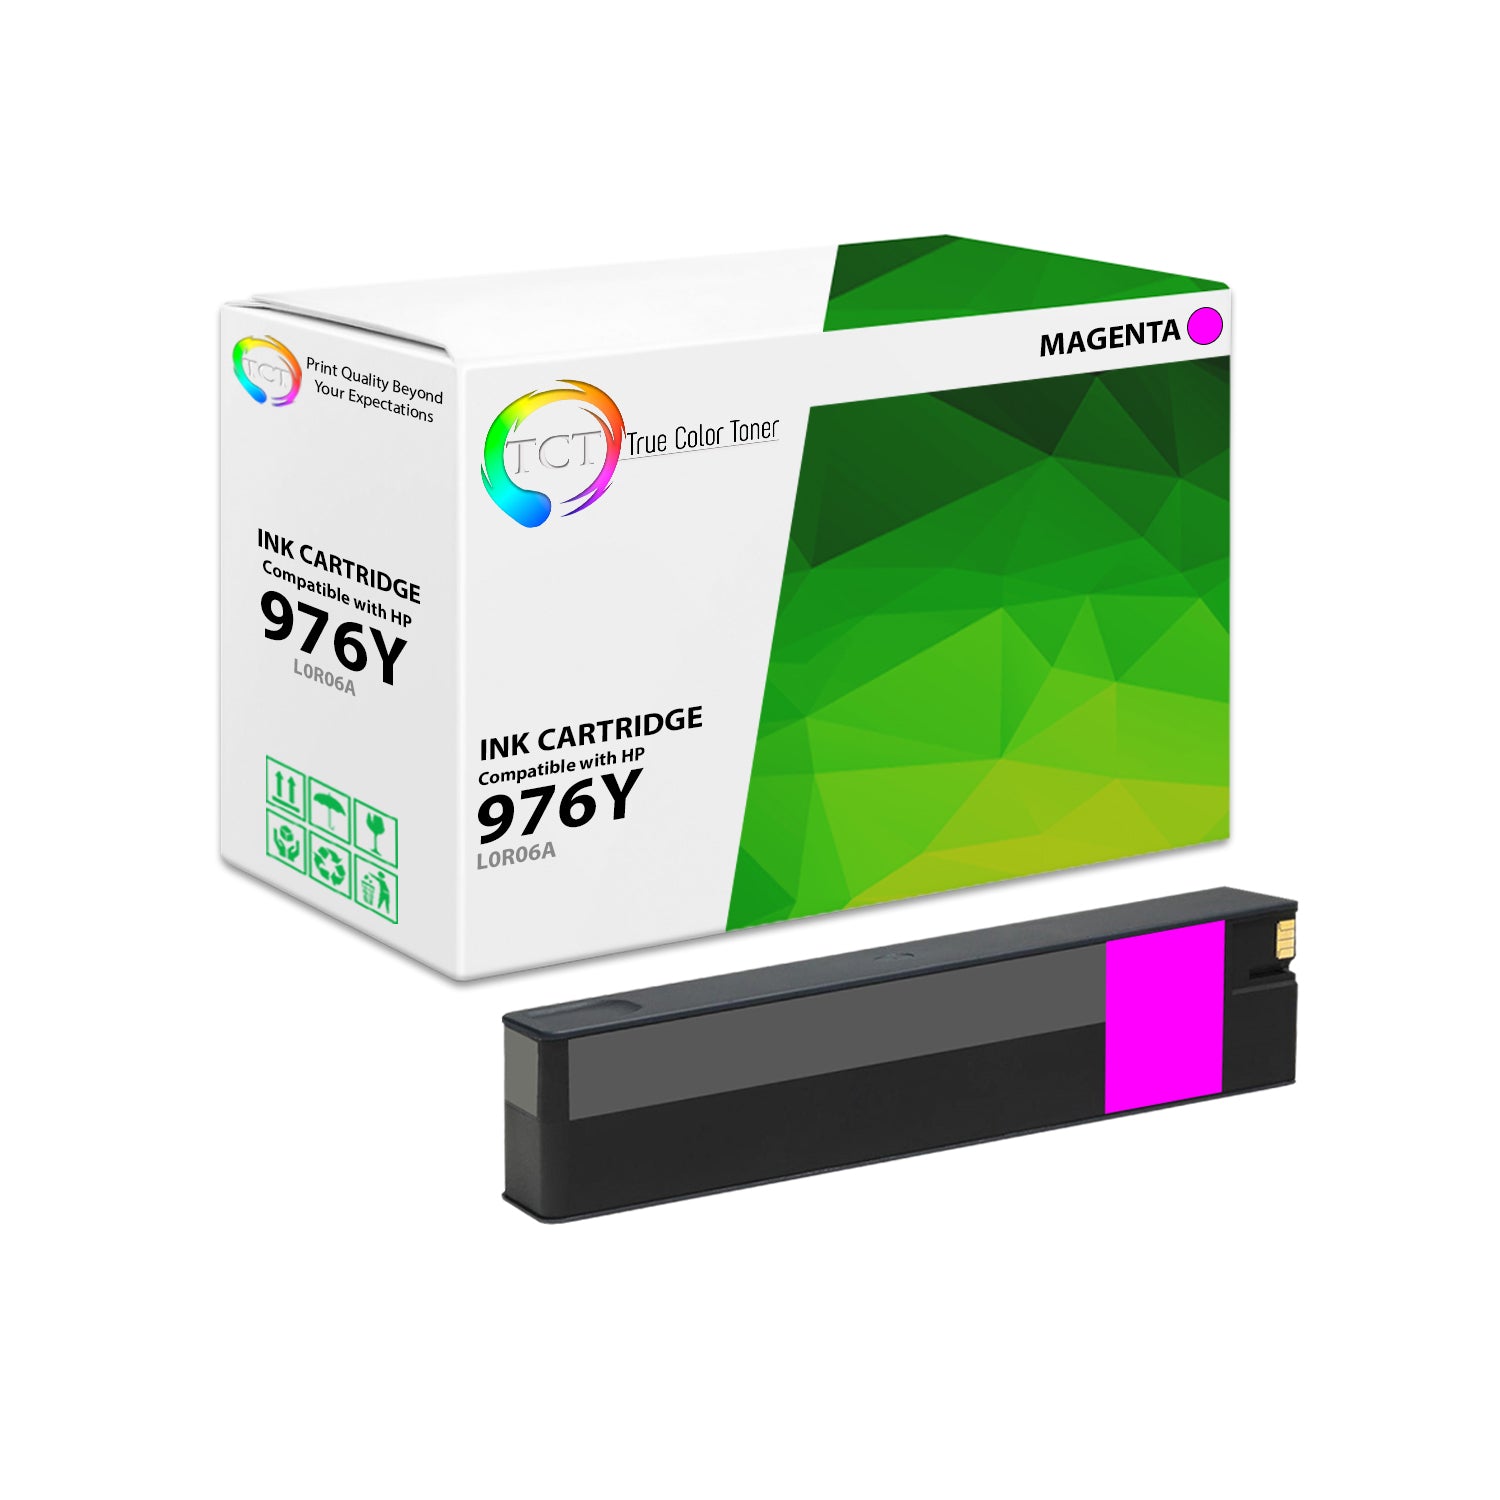 TCT Compatible Extra High Yield Ink Cartridge Replacement for the HP 976Y Series - 1 Pack Magenta